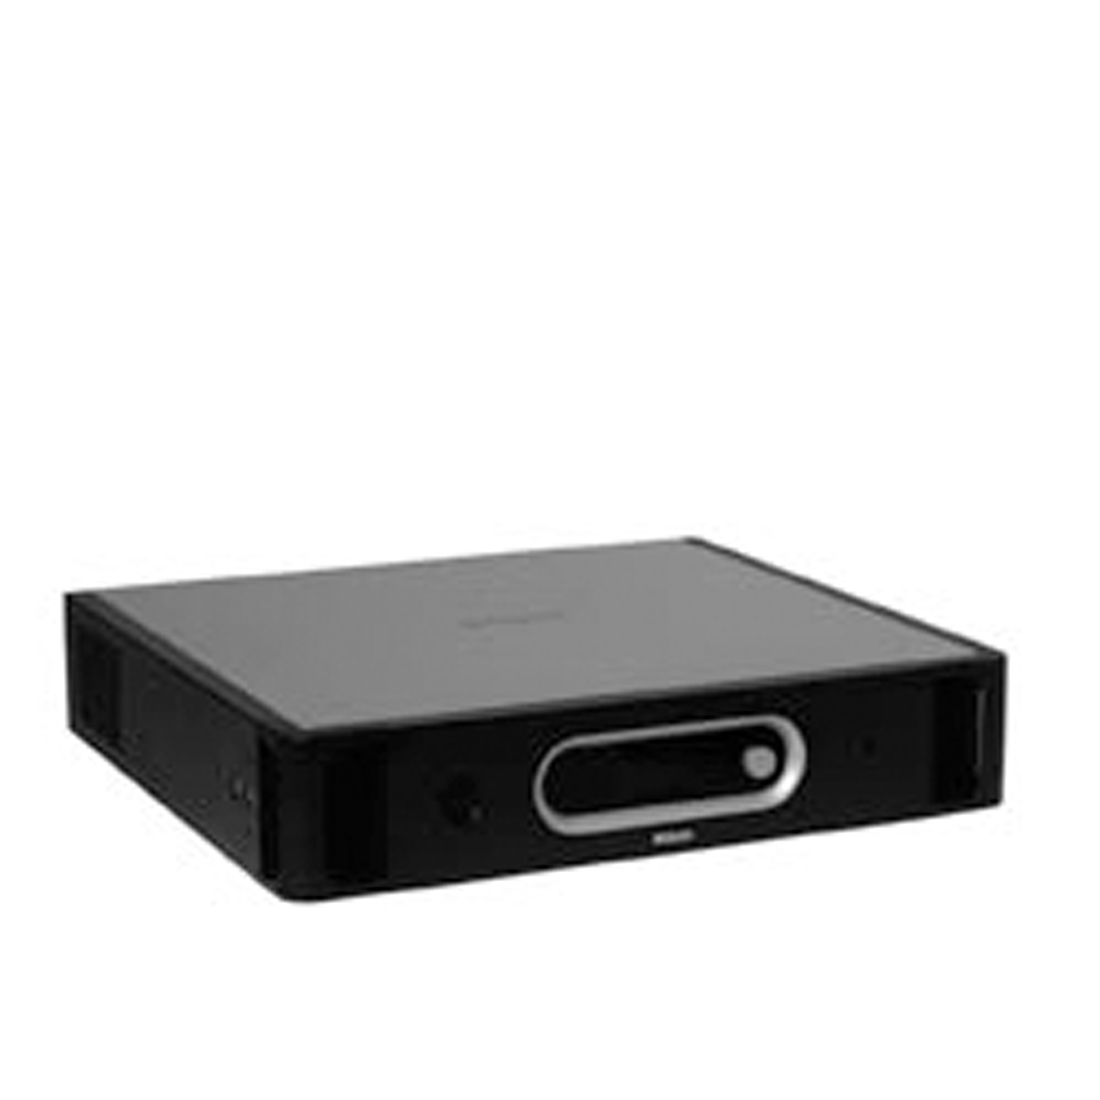 DCN-CCUB Basic Central Control Unit | Video Conferencing System, Latest ...